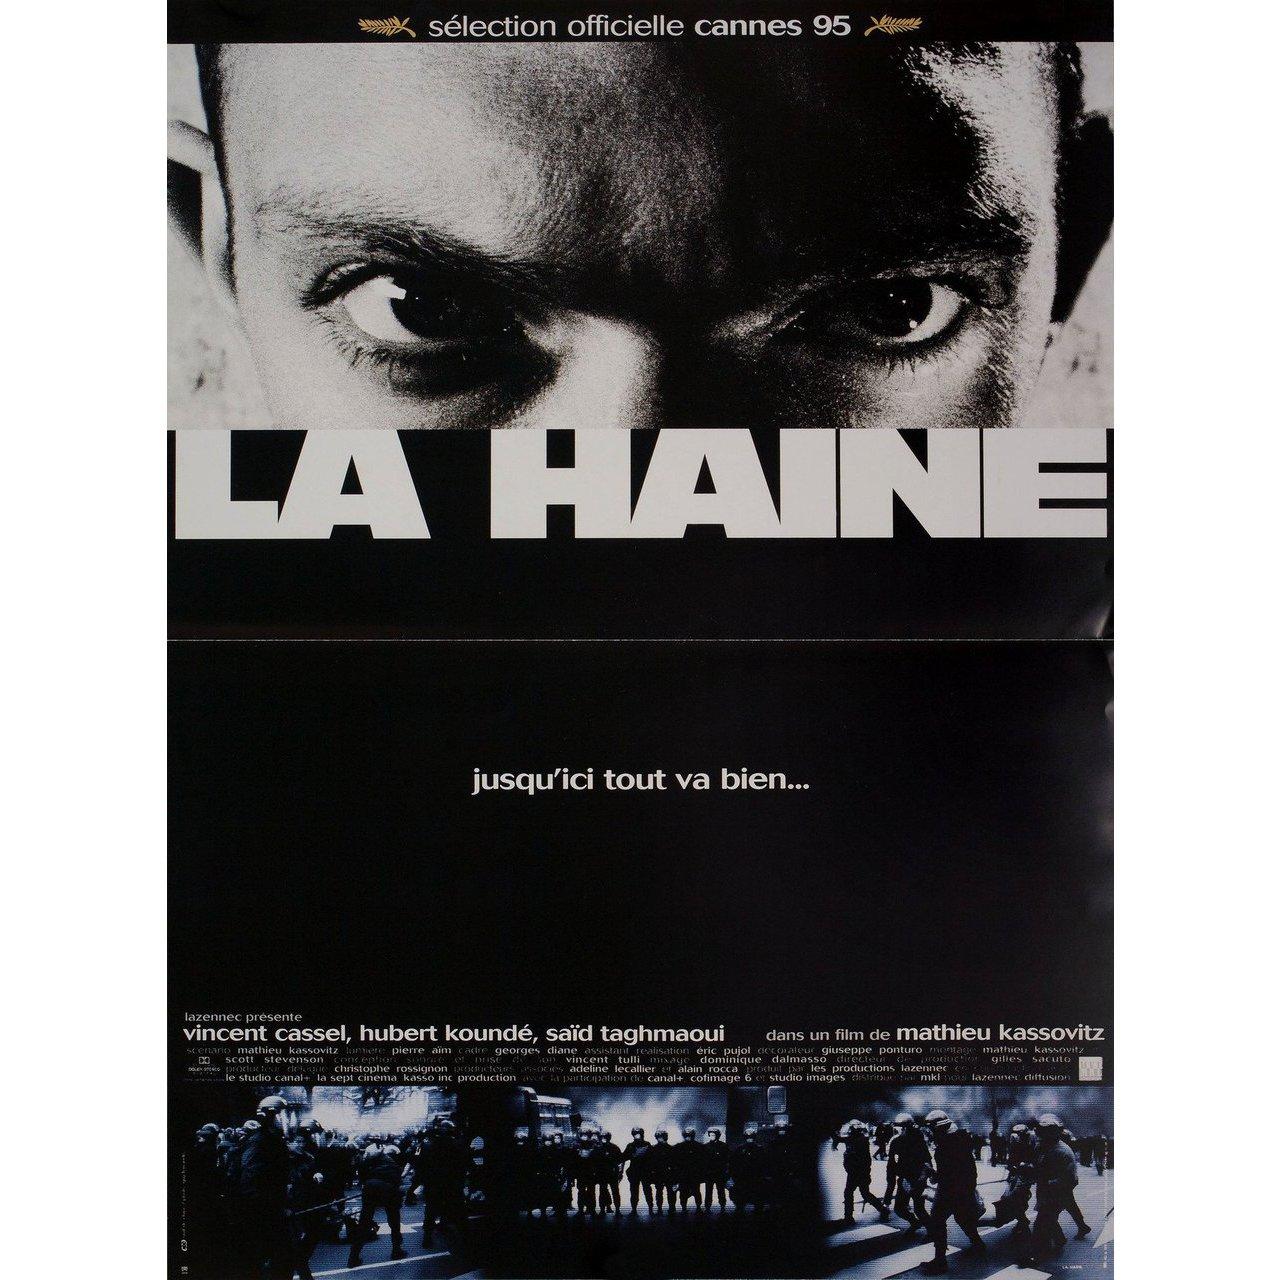 Original 1995 French petite poster for the film La Haine (Hate) directed by Mathieu Kassovitz with Vincent Cassel / Hubert Kounde / Said Taghmaoui / Abdel Ahmed Ghili. Fine condition, folded. Many original posters were issued folded or were